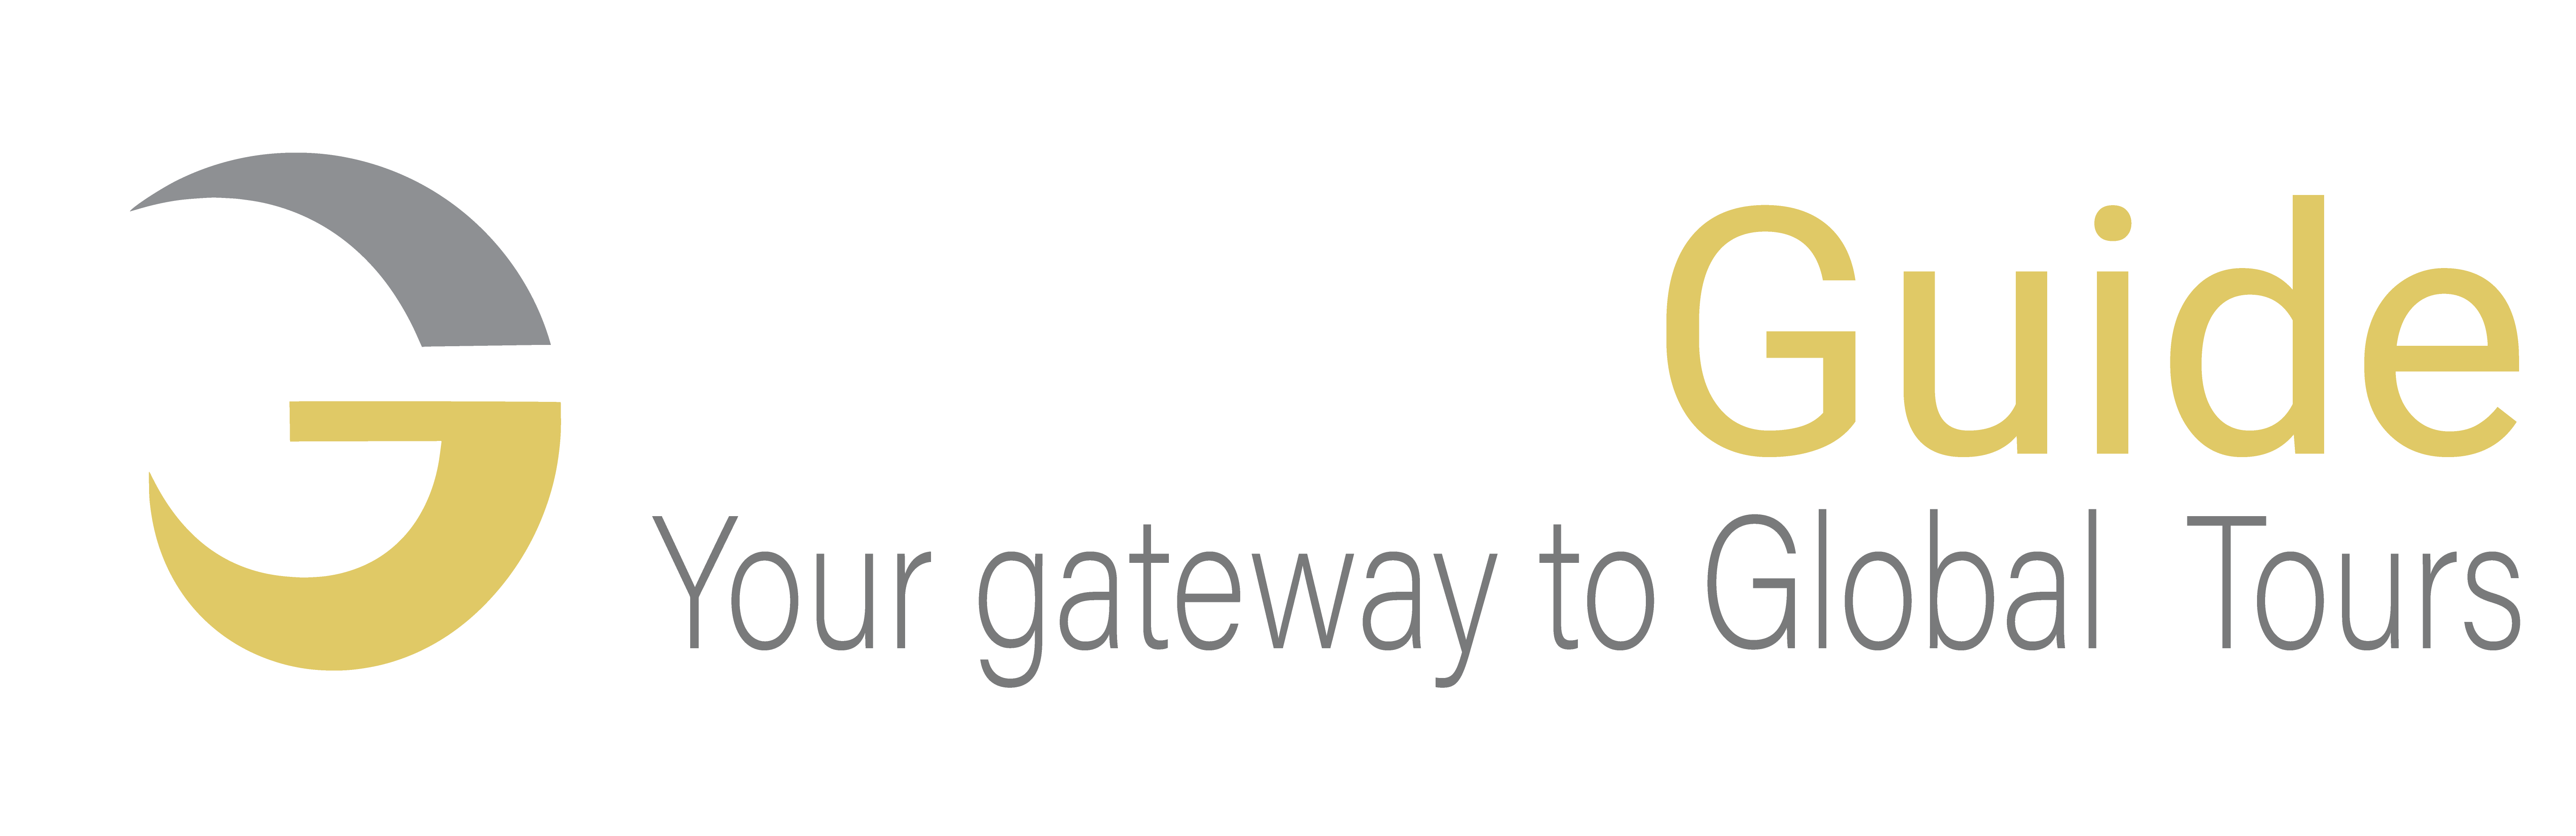 Global Guide tours